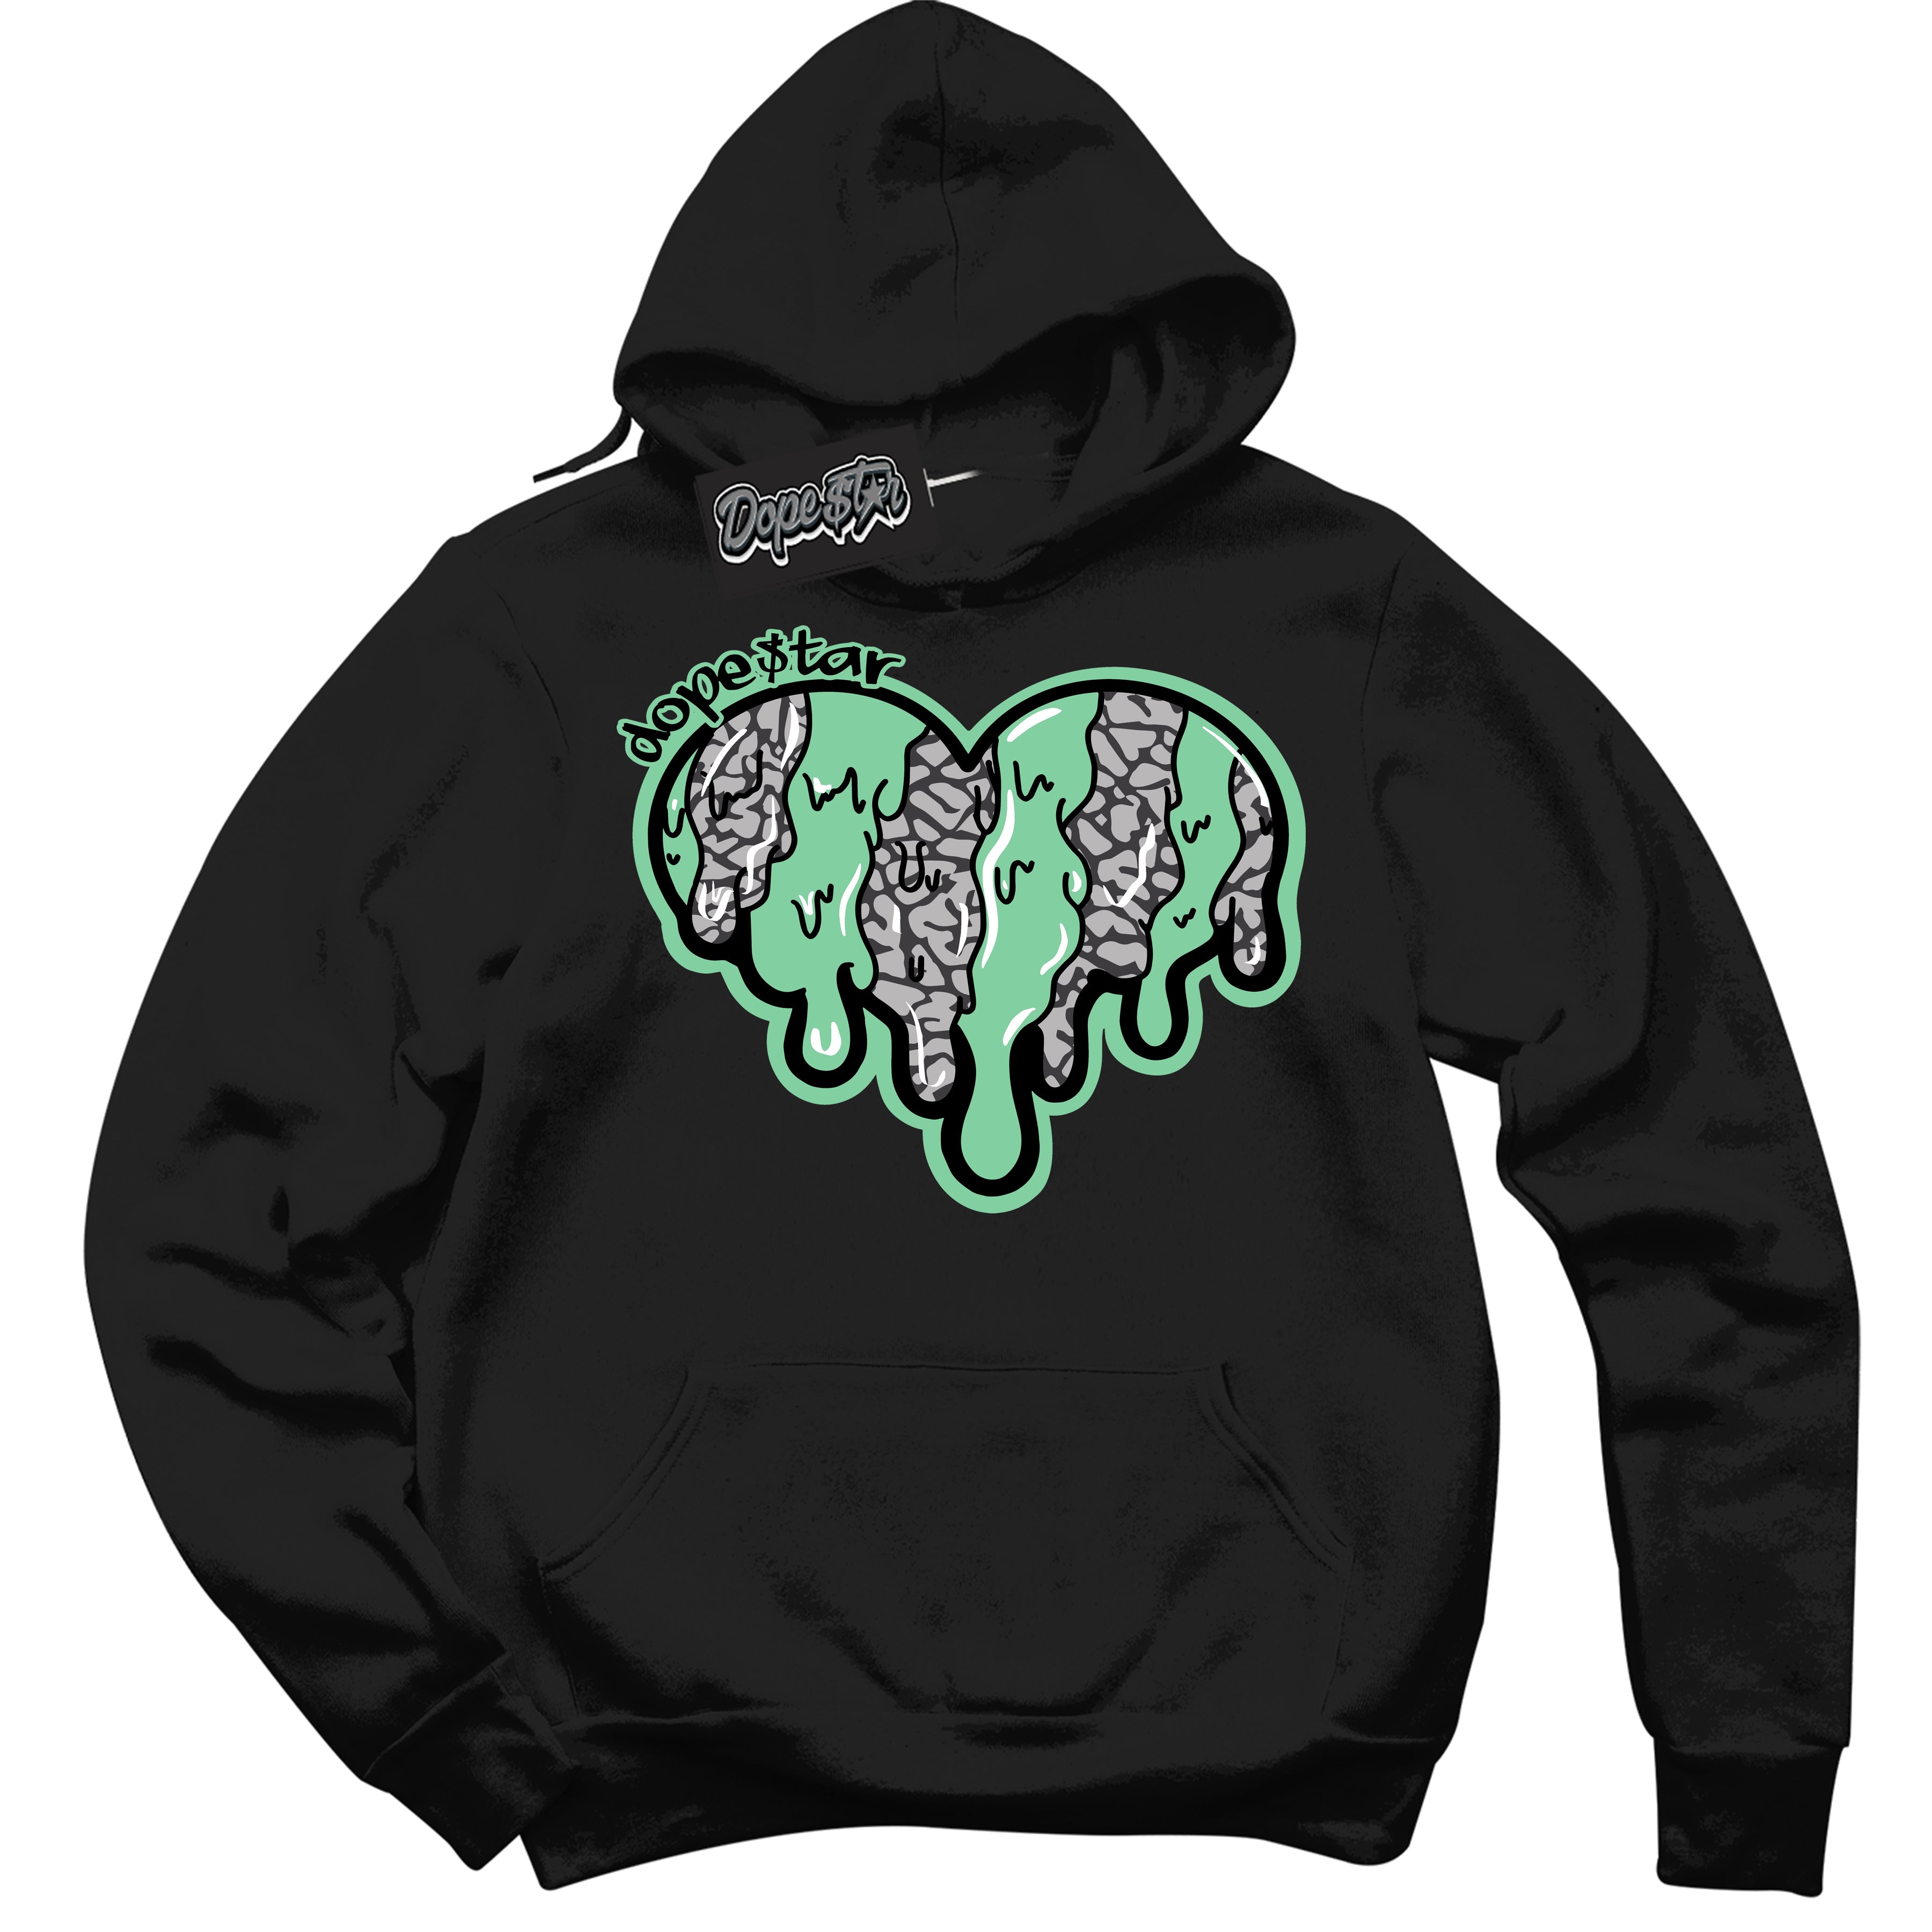 Cool Black Graphic DopeStar Hoodie with “ Melting Heart “ print, that perfectly matches Green Glow 3S sneakers